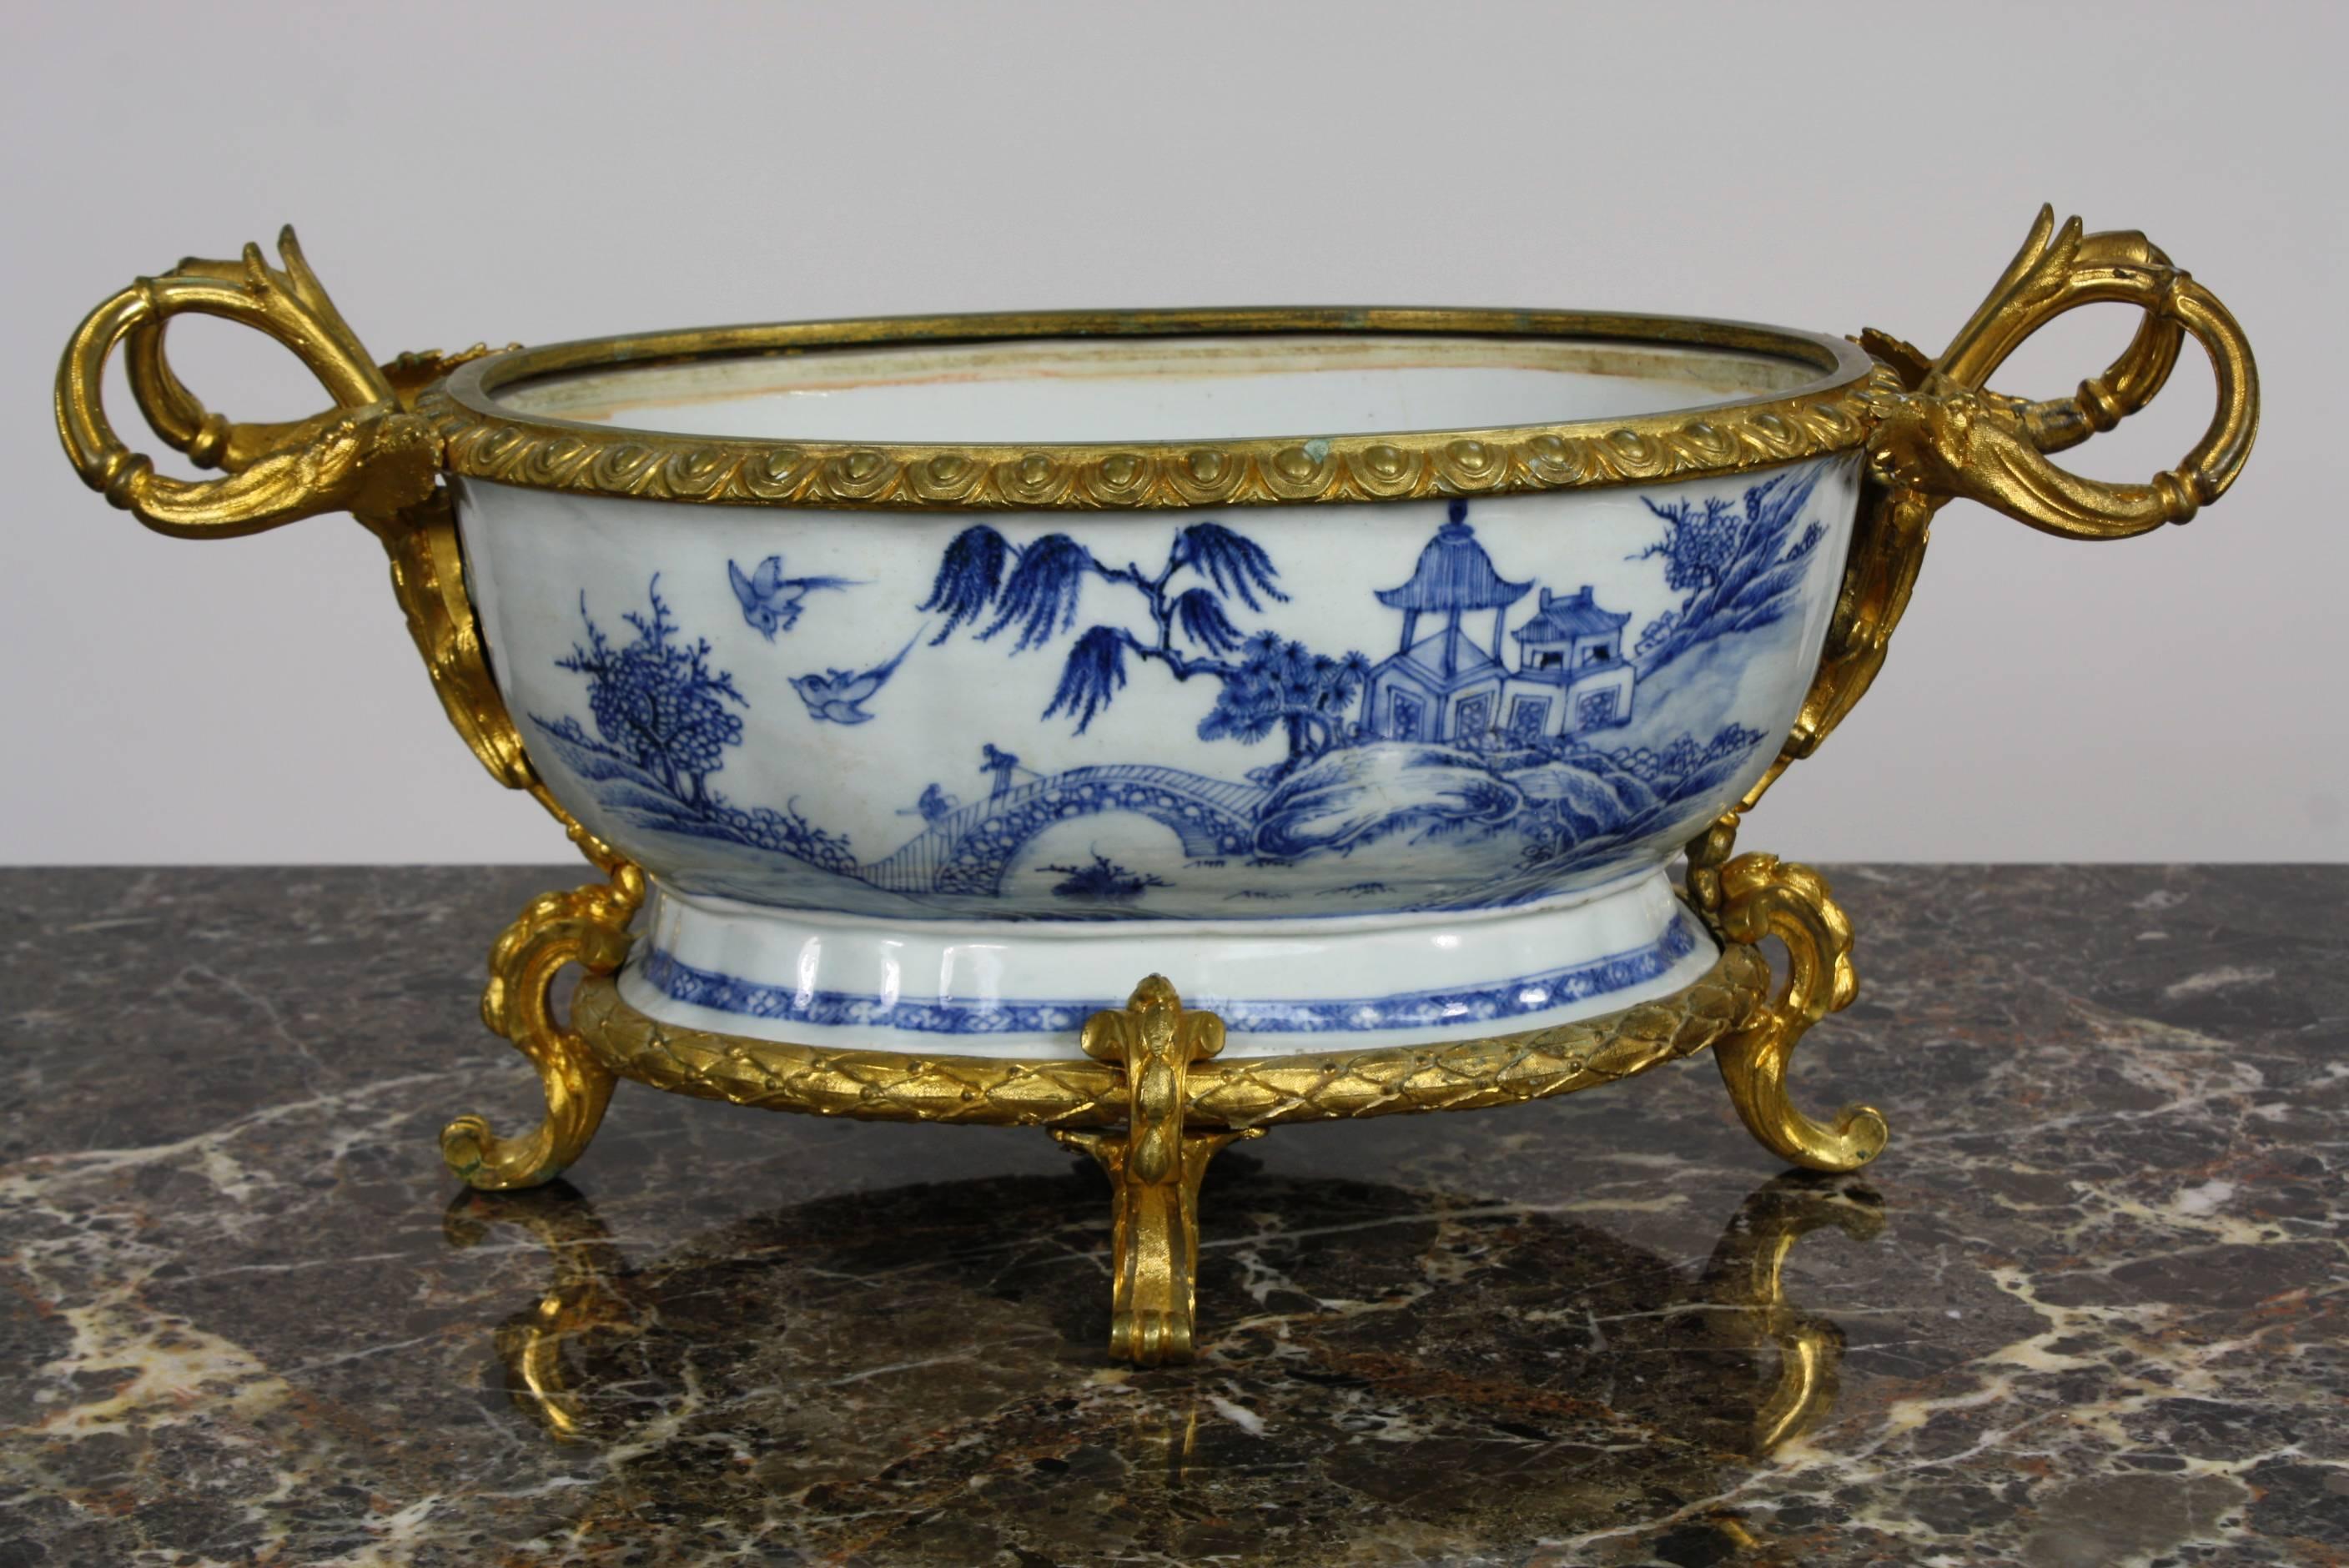 A very high quality, eye-catching 19th century, French, jardinière in blue and white porcelain with Chinoiserie scene featuring a pagoda, birds and river under a bridge. The gilt bronze mounts are in the Louis XV style and are finely-chased.